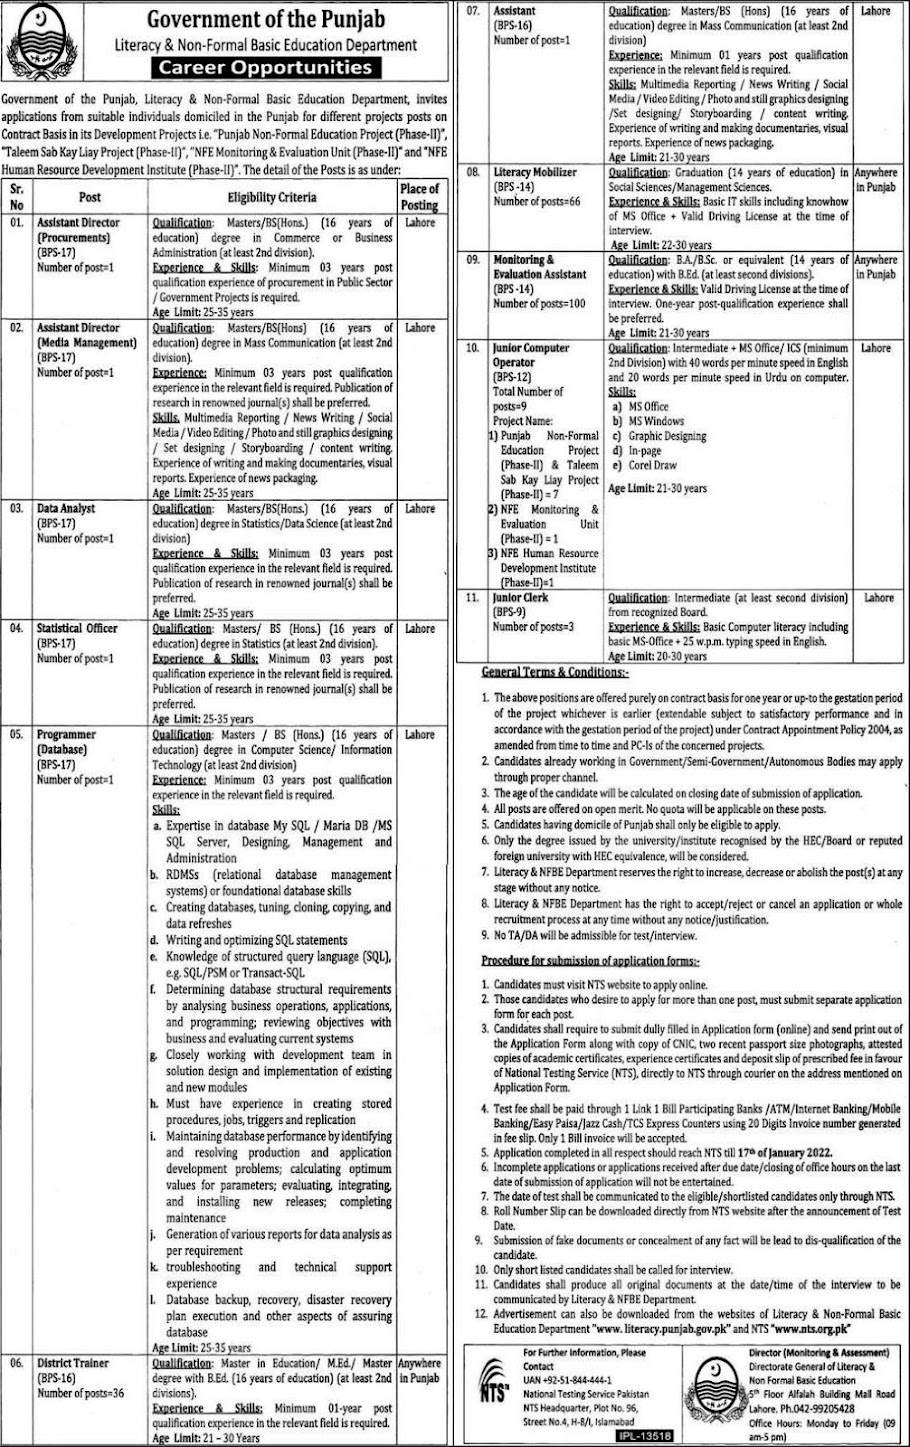 Govt of the Punjab Literacy & Non Formal Basic Education Department Jobs 2022